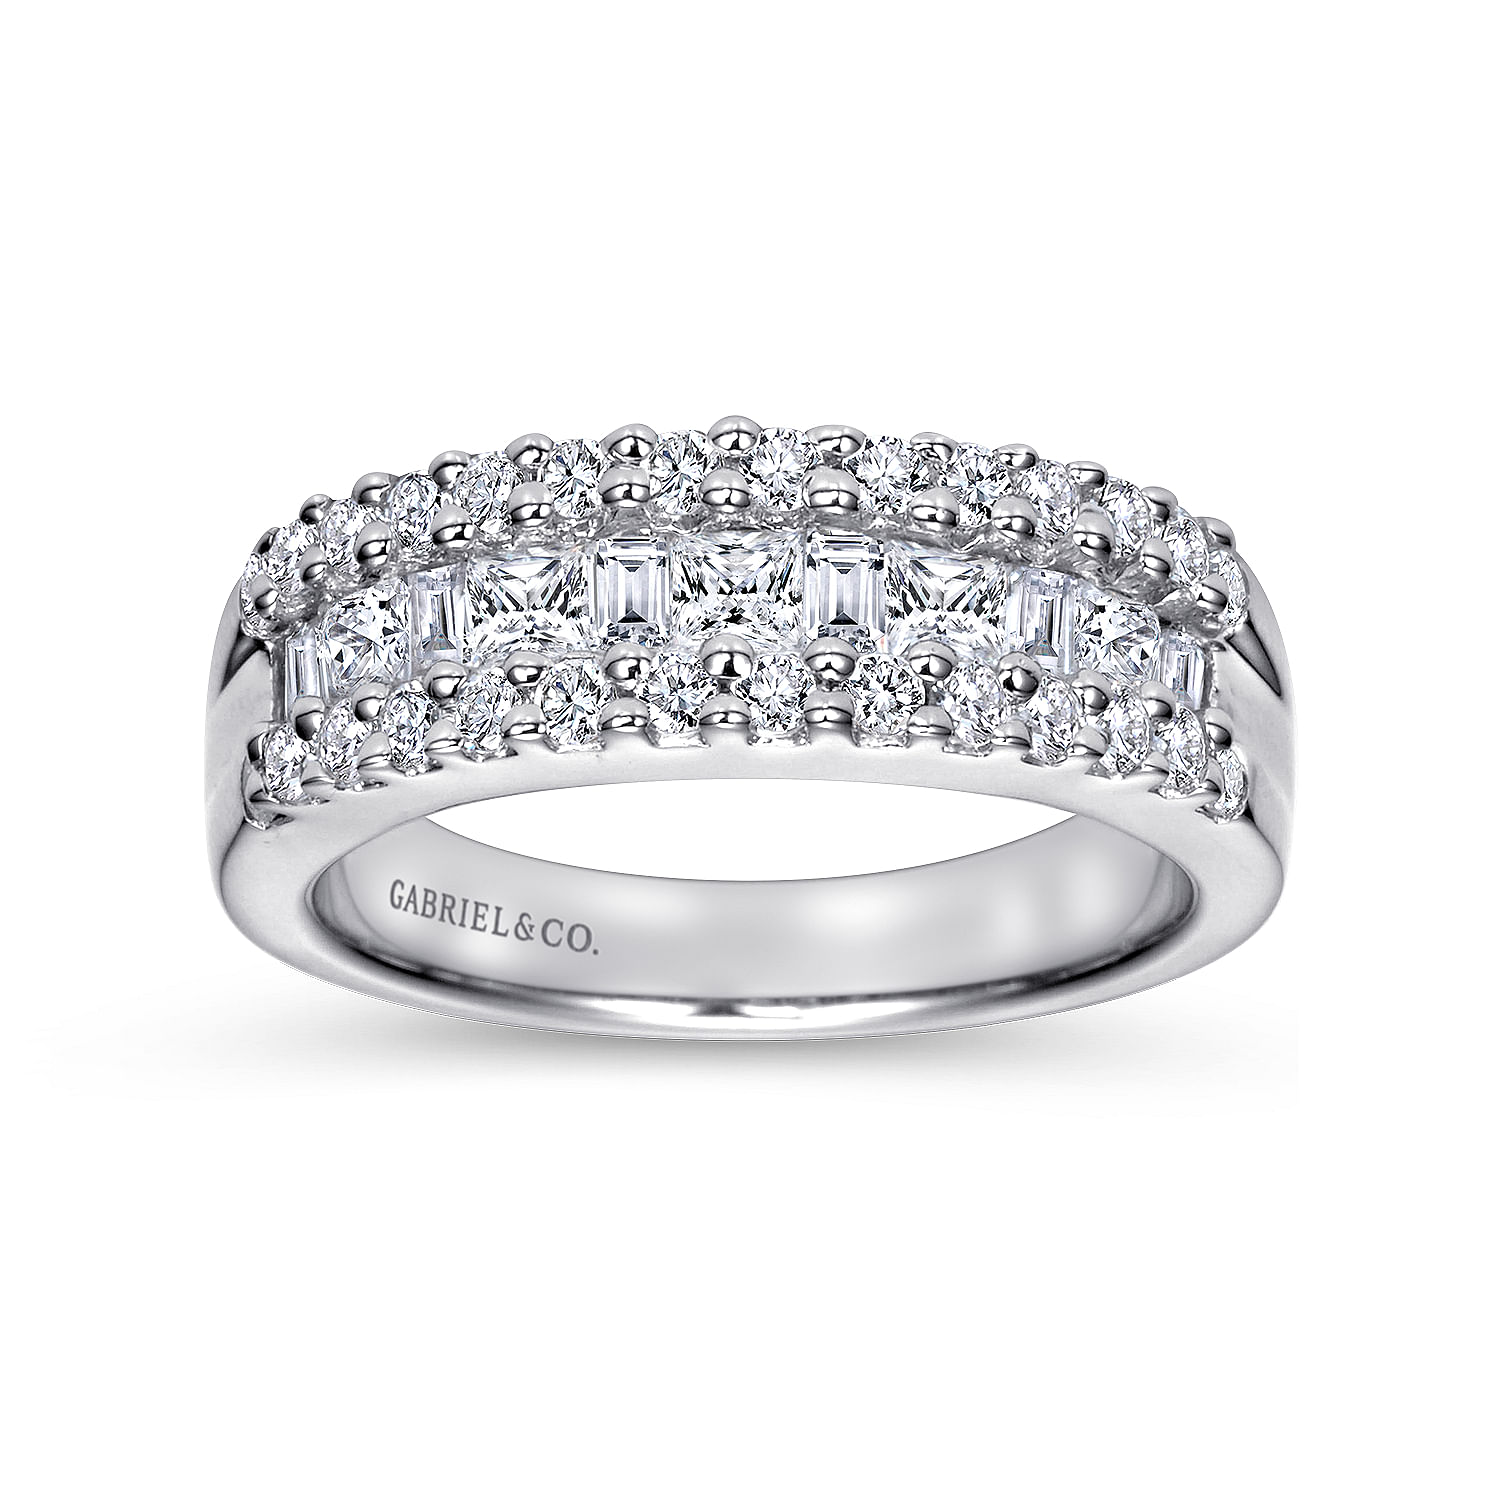 Wide 14K White Gold Round and Baguette Diamond Anniversary Band